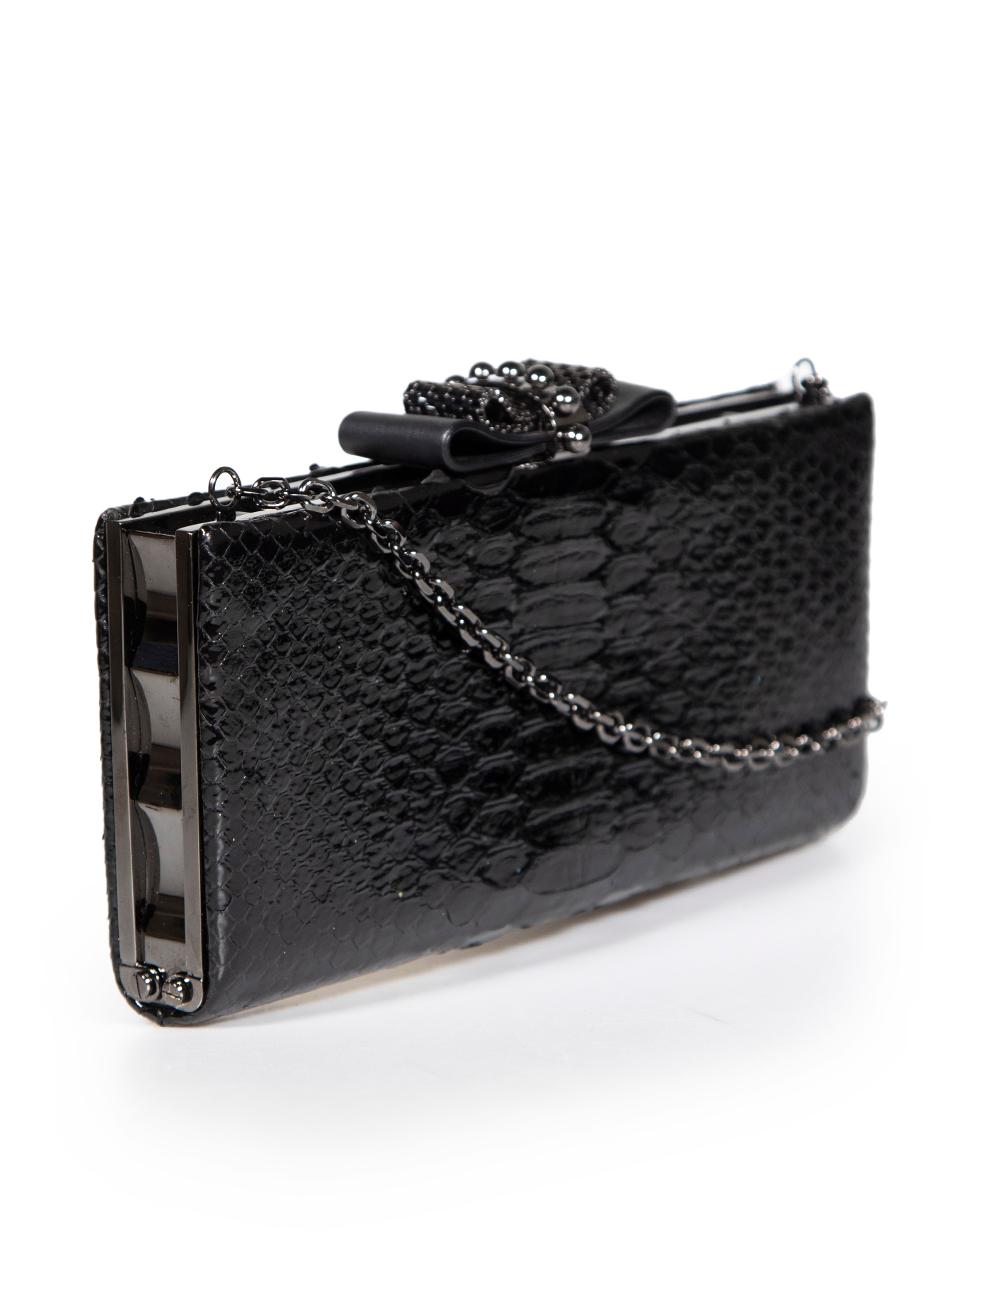 CONDITION is Very good. Minimal wear to clutch is evident. Some of the python leather is peeling at the opening on this used Christian Louboutin designer resale item.
 
 
 
 Details
 
 
 Model: Sweet Charity
 
 Black
 
 Python
 
 Mini clutch bag
 
